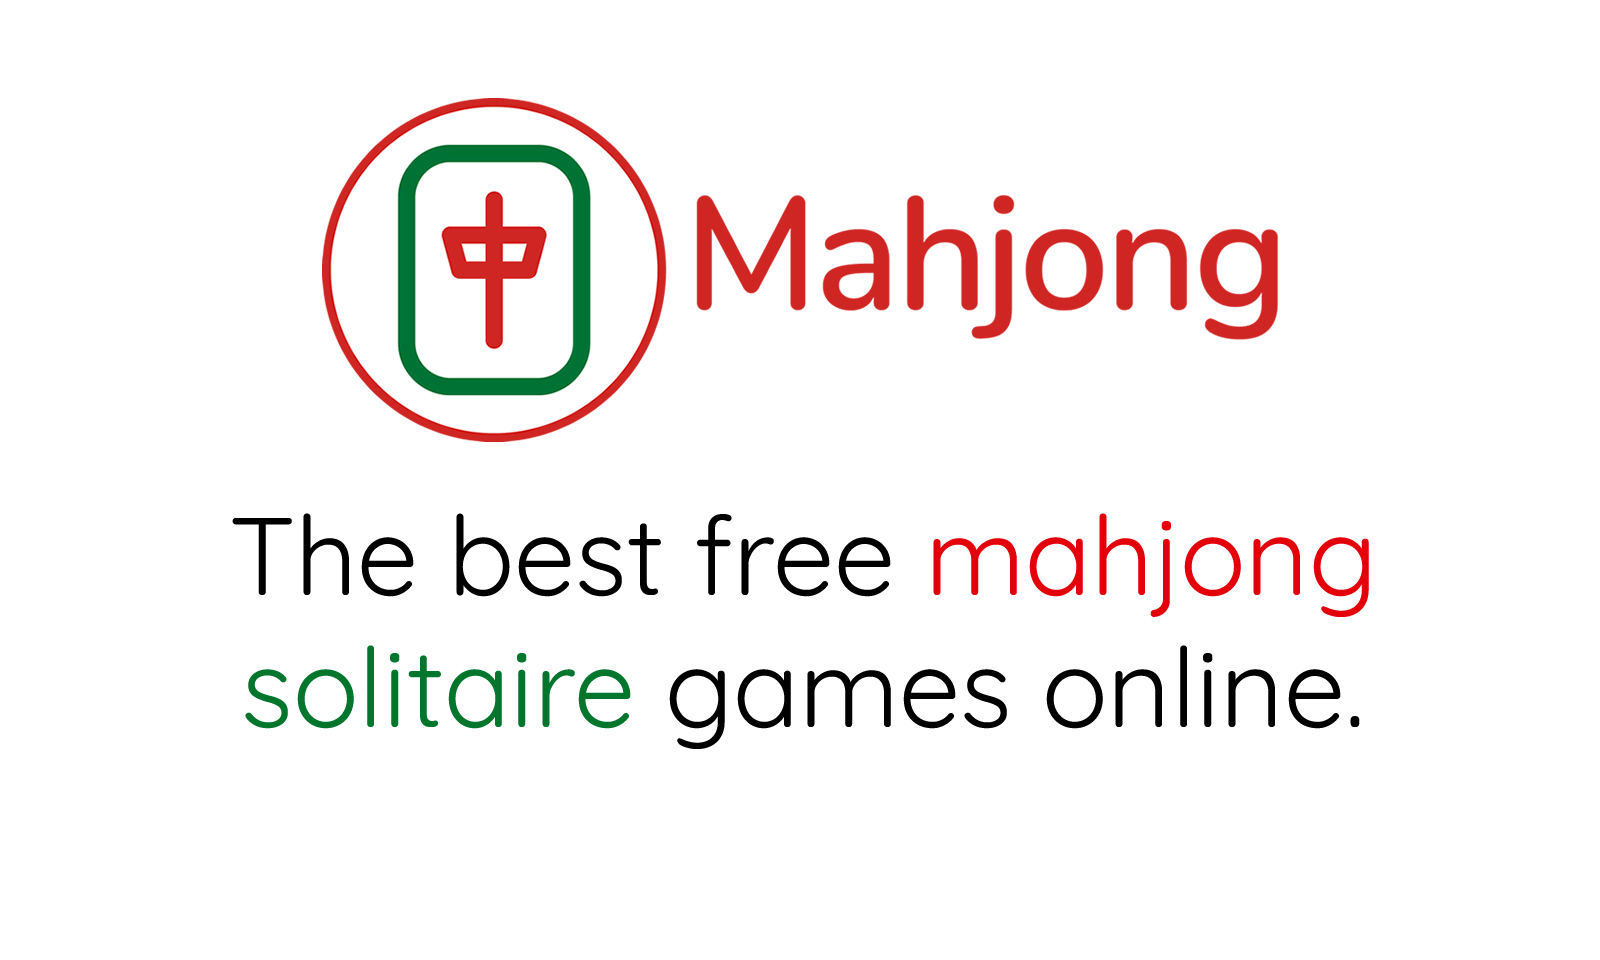 🕹️ Play Cooking Mahjong Game: Free Online Culinary Arts Food Mahjong  Solitaire Video Game for Kids & Adults